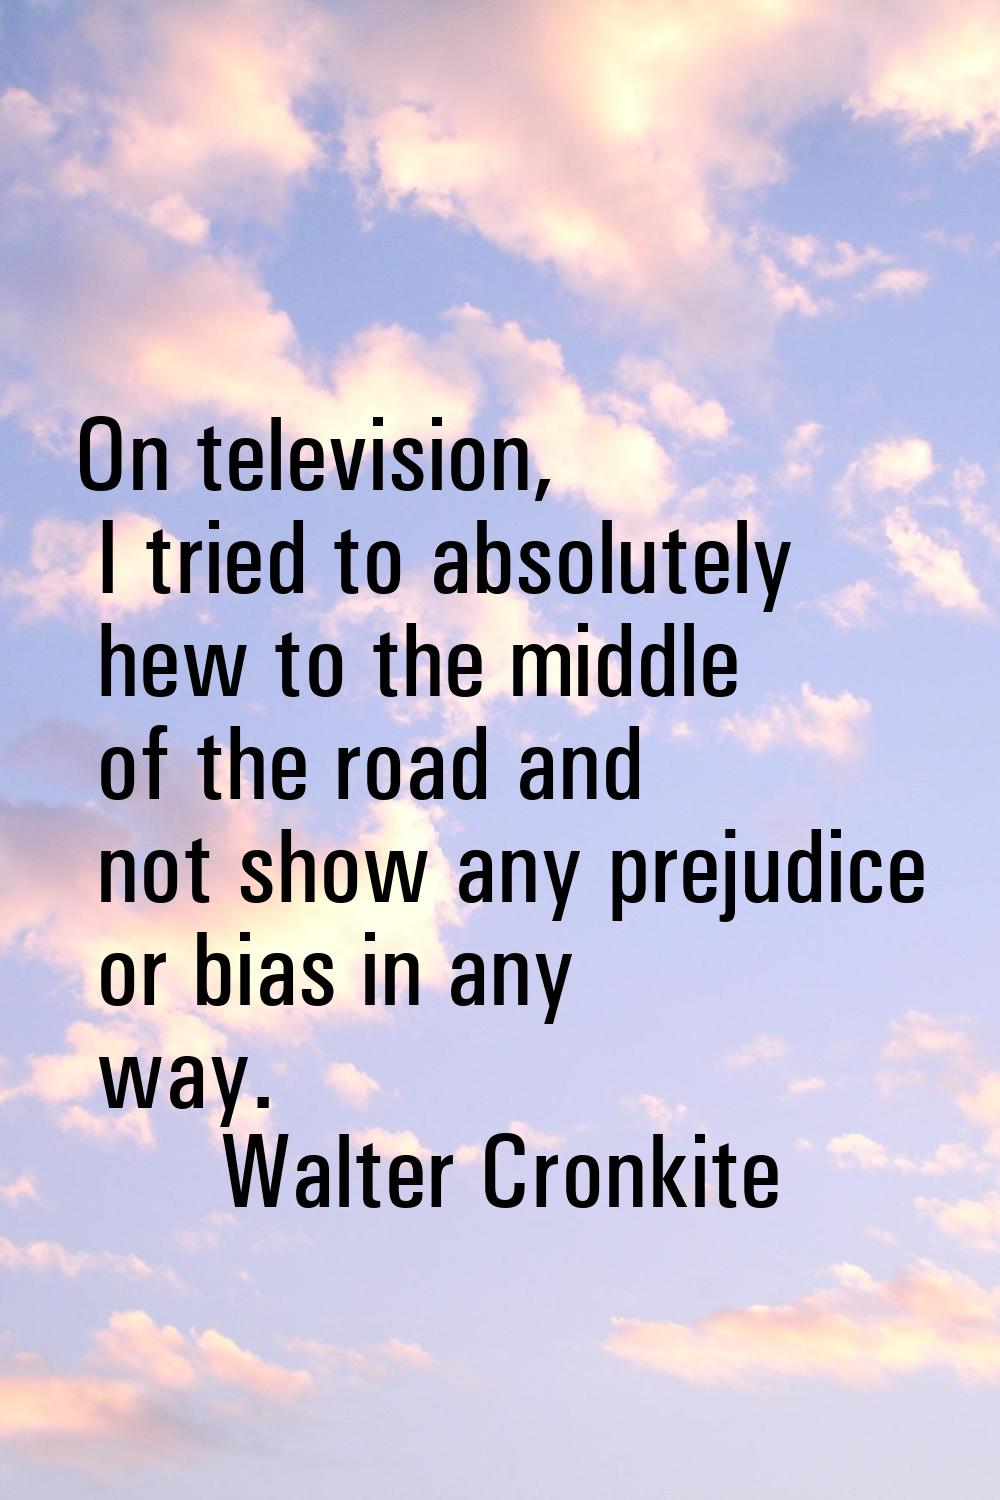 On television, I tried to absolutely hew to the middle of the road and not show any prejudice or bi